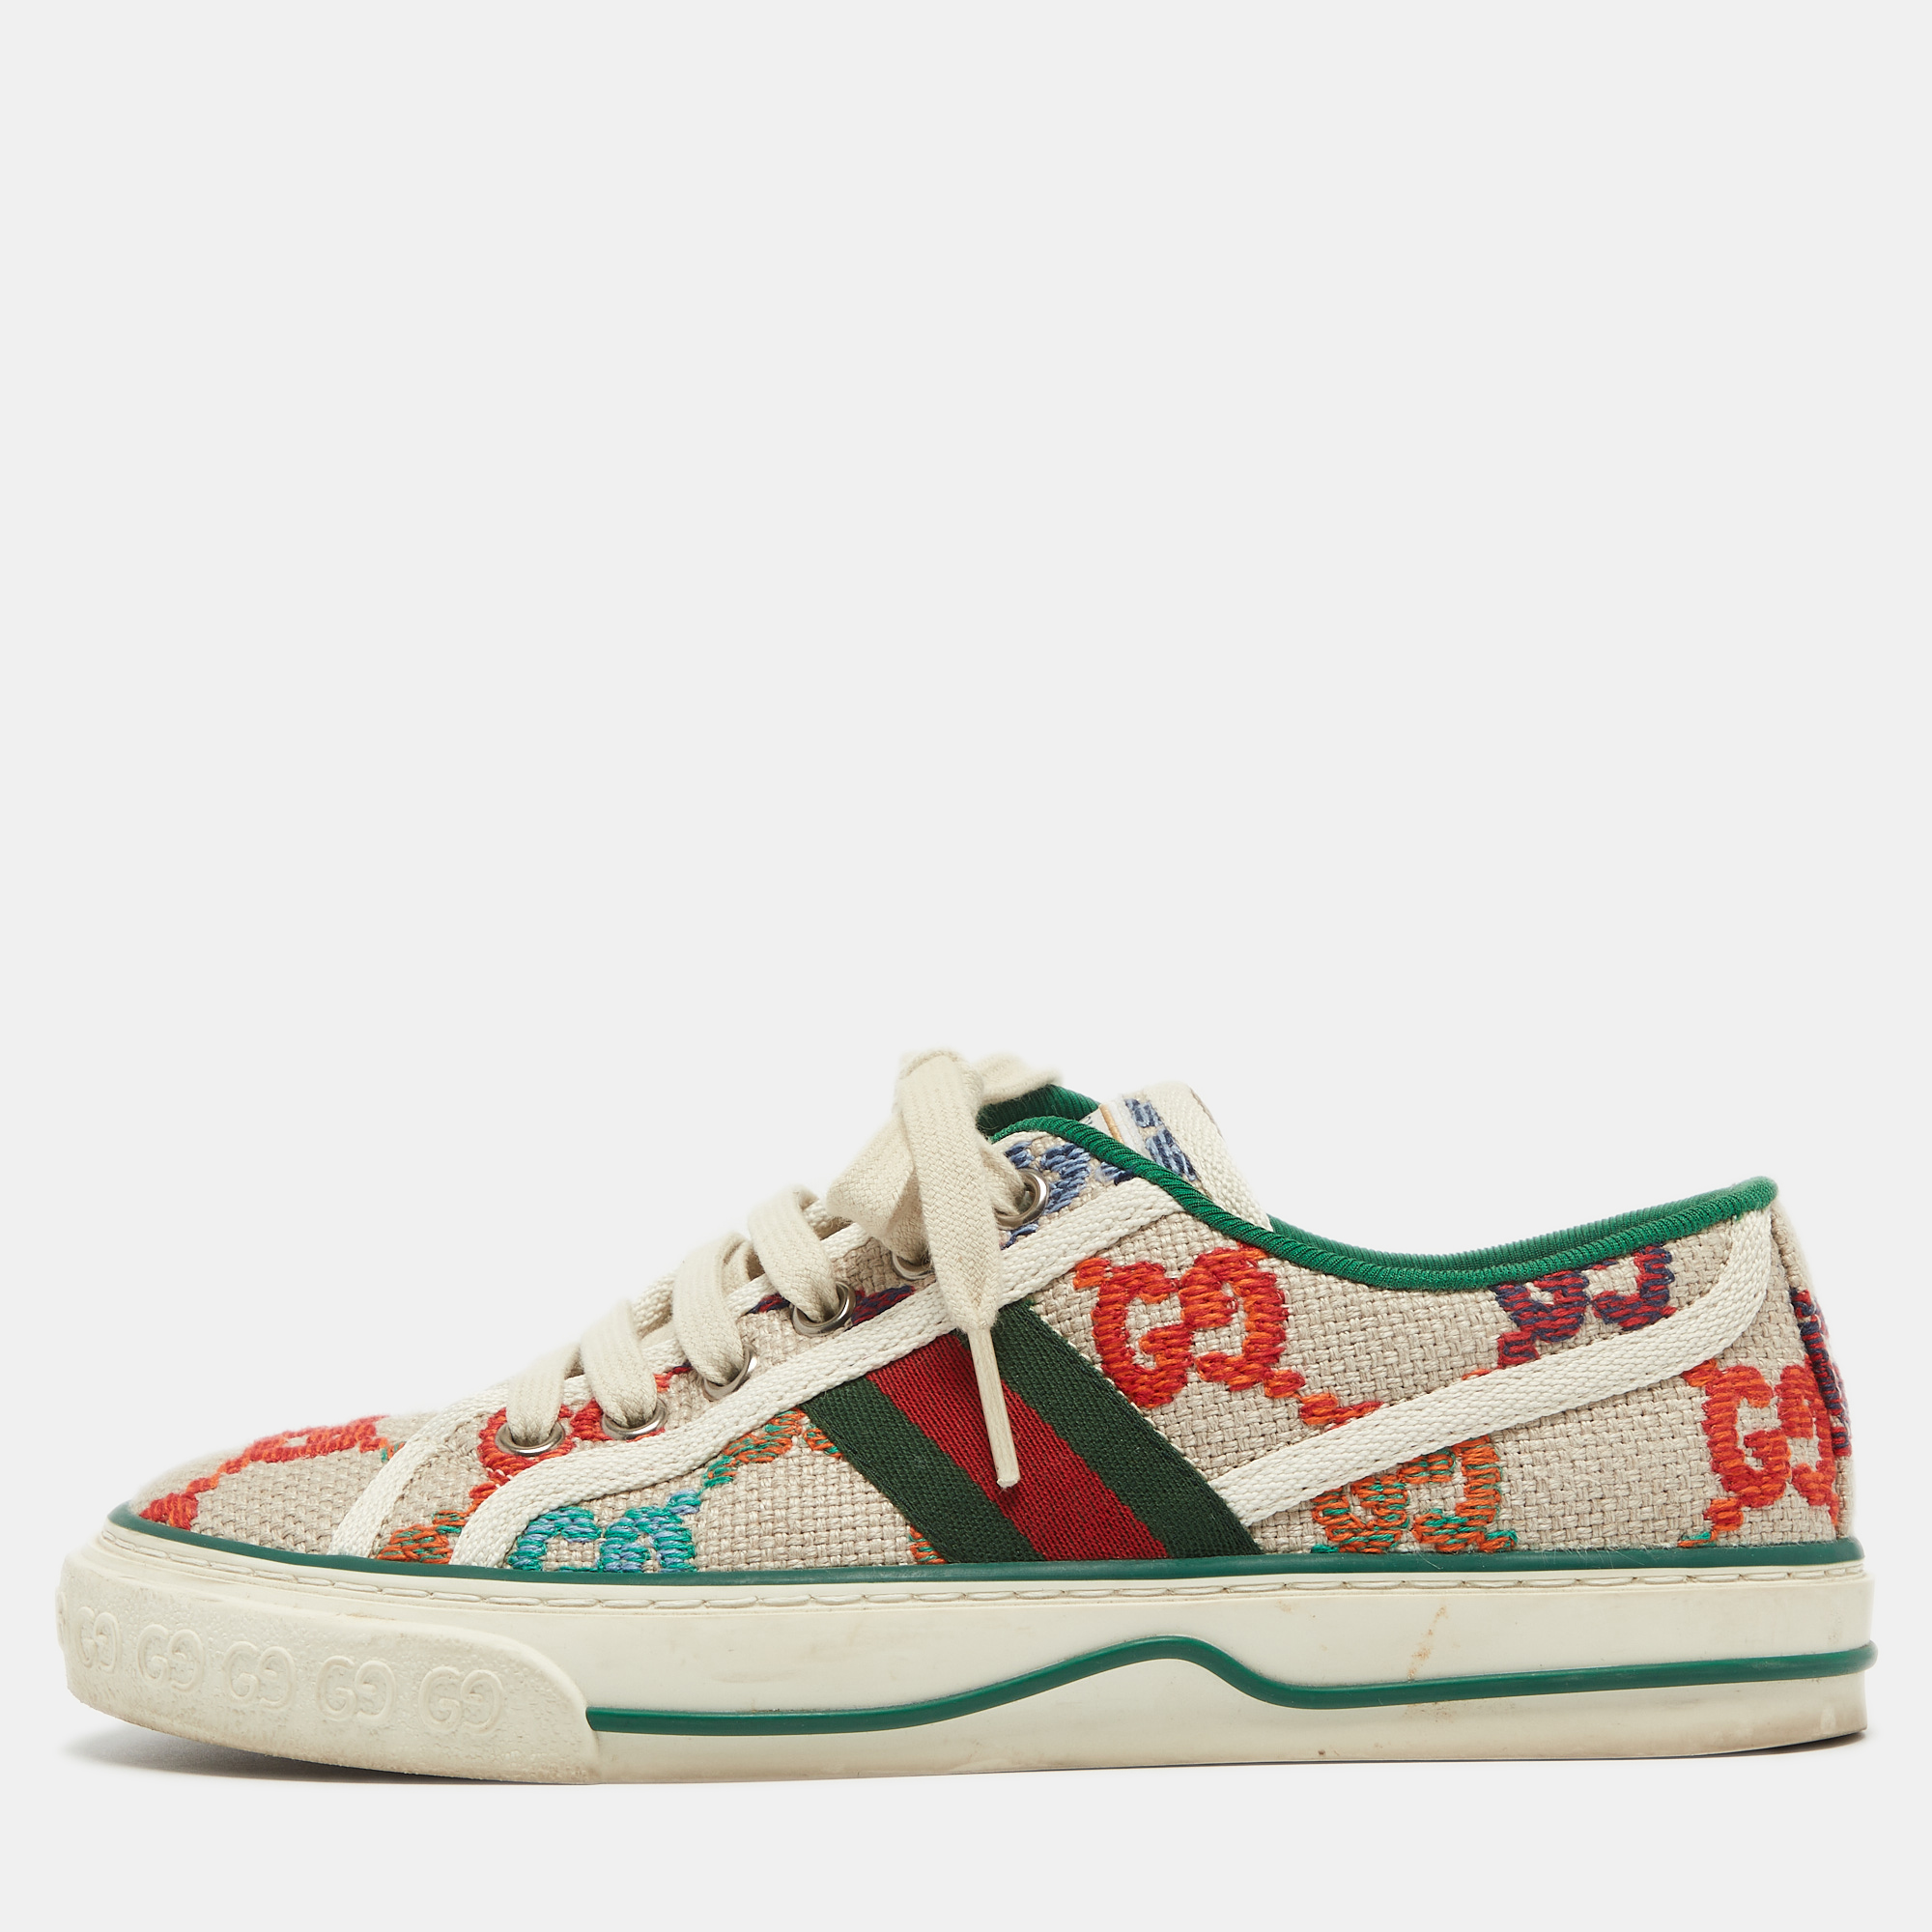 Gucci multicolor embroidered gg canvas tennis 1977 sneakers size 35.5